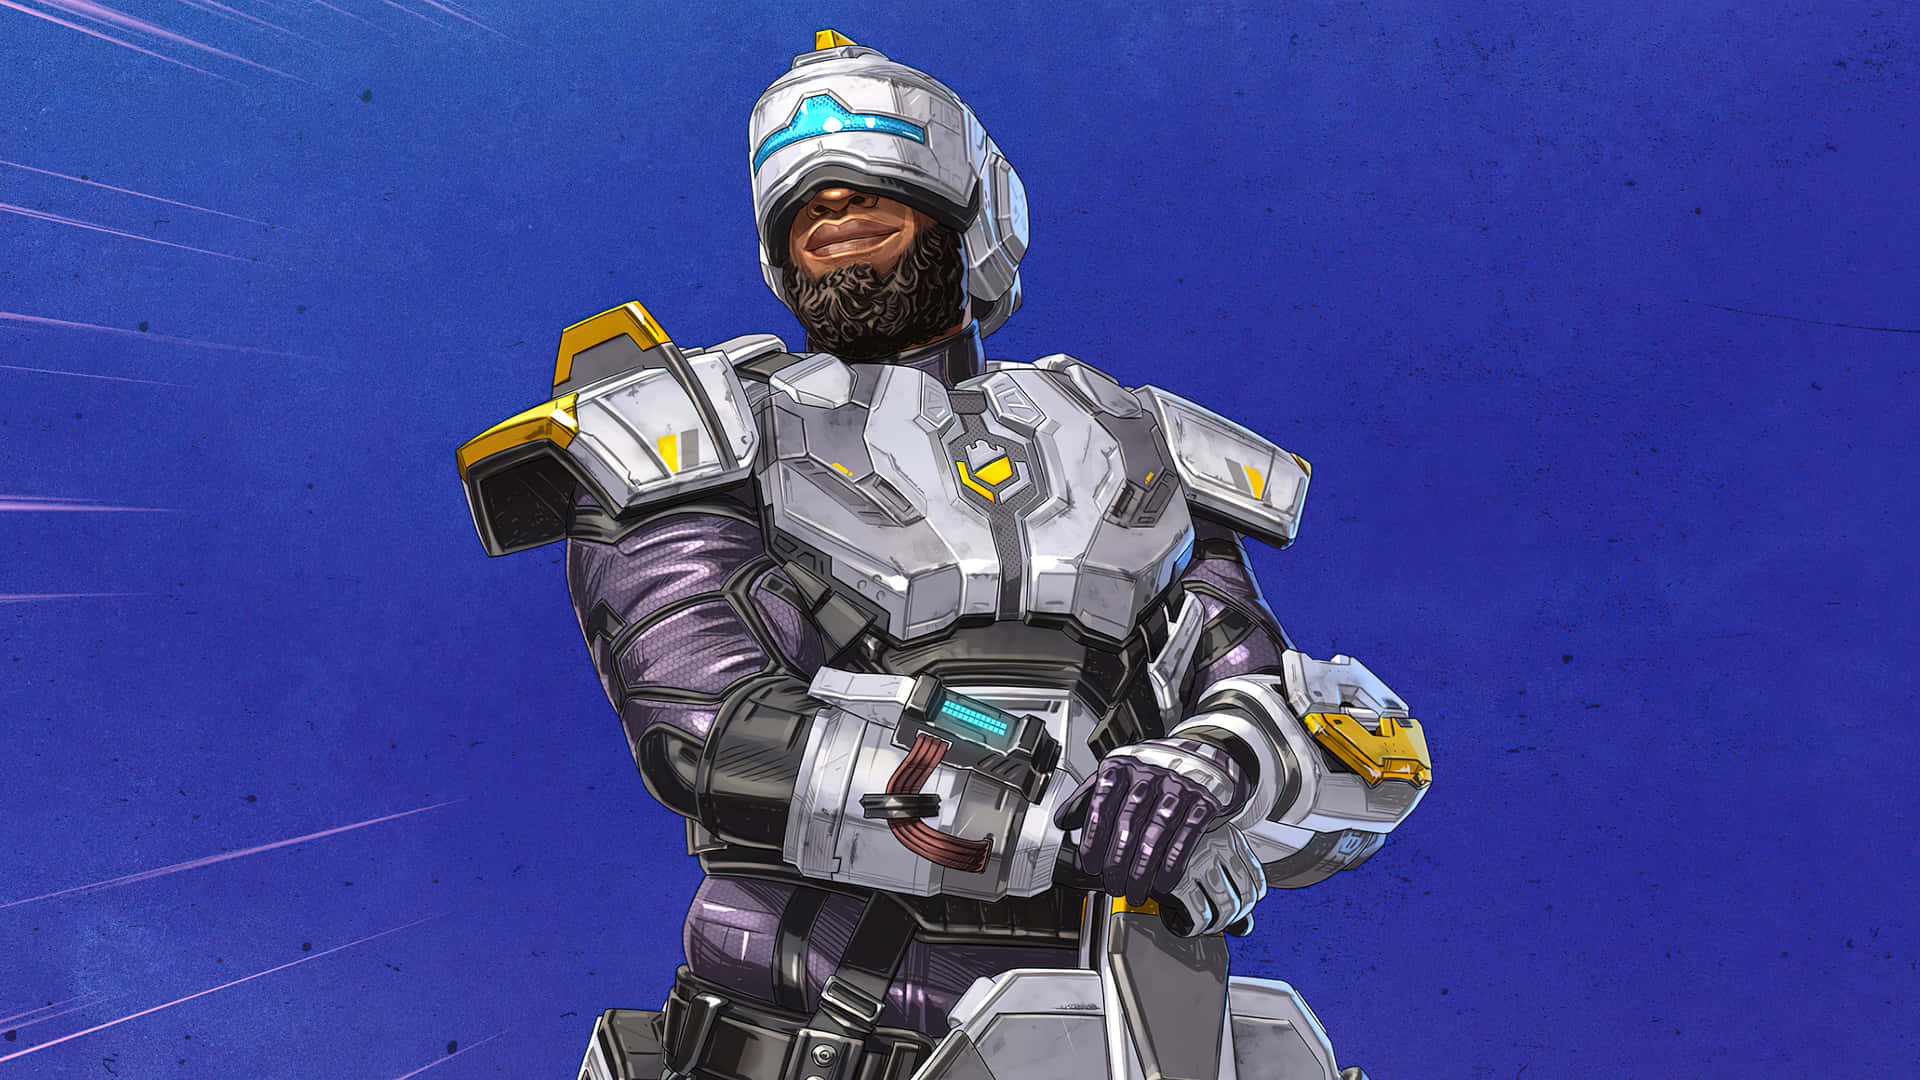 Apex Legends Characters in Action Wallpaper